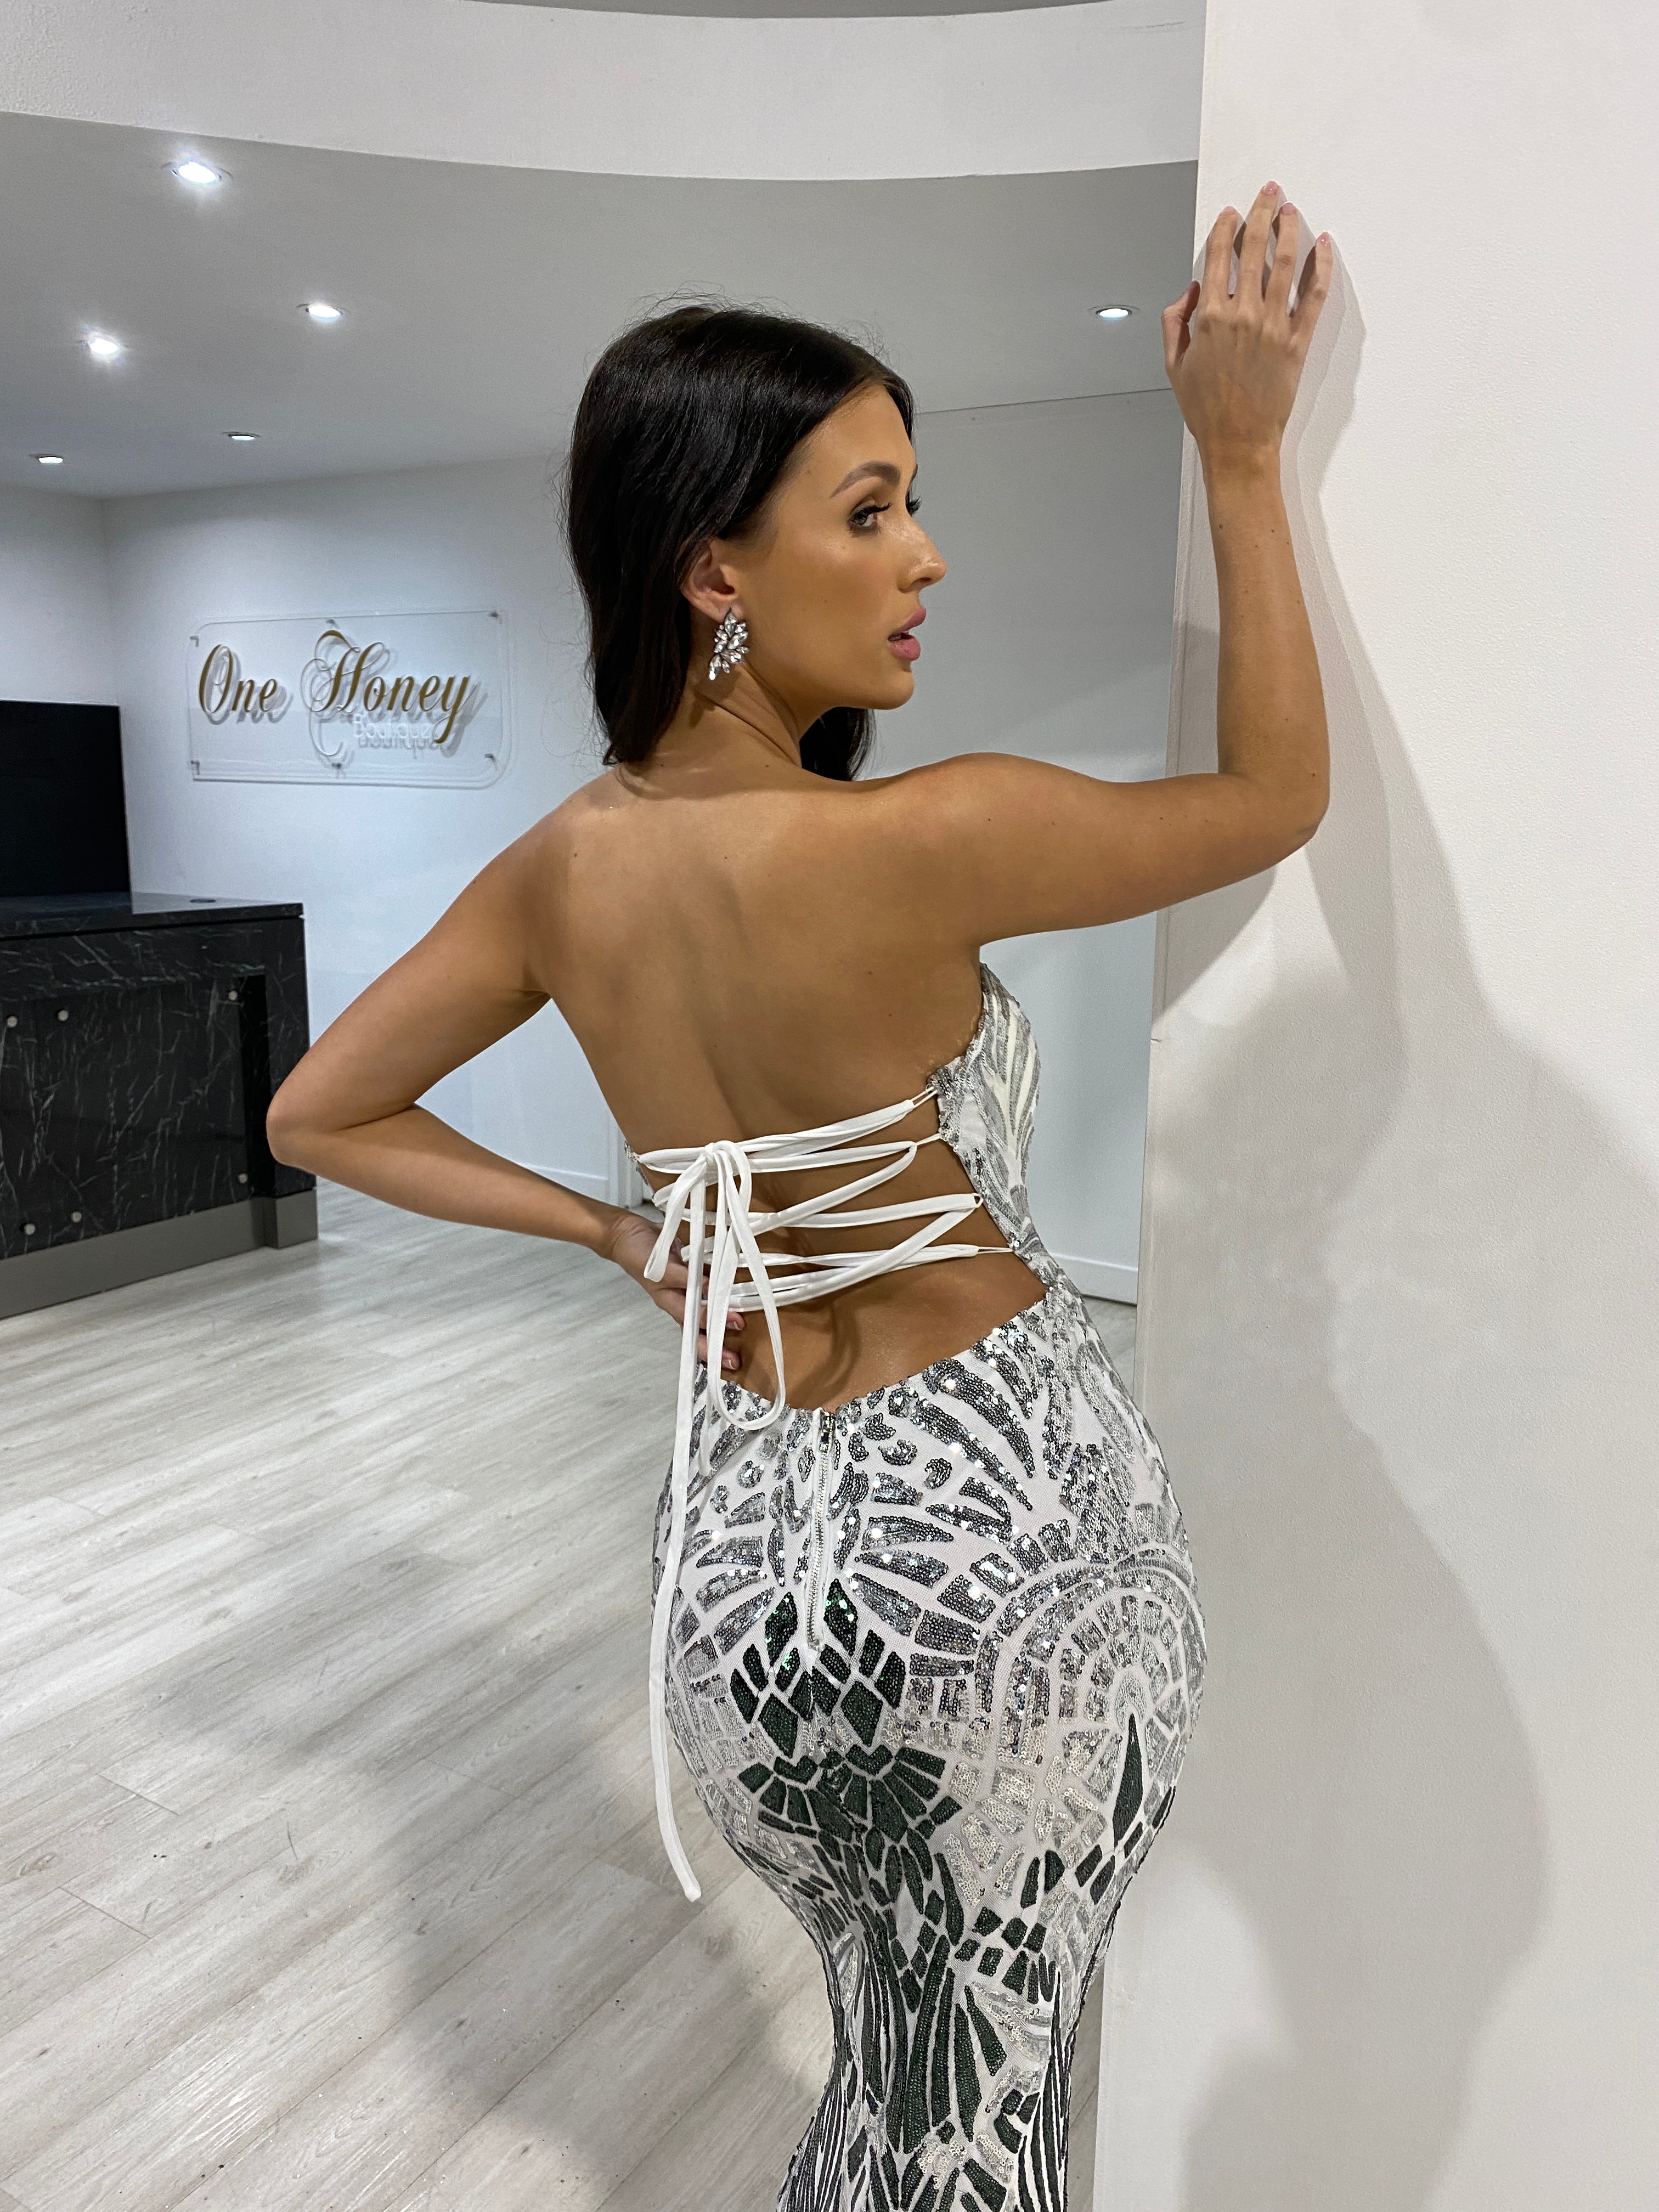 Honey Couture CIENNA White Silver & Black Lace Up Mermaid Formal Dress